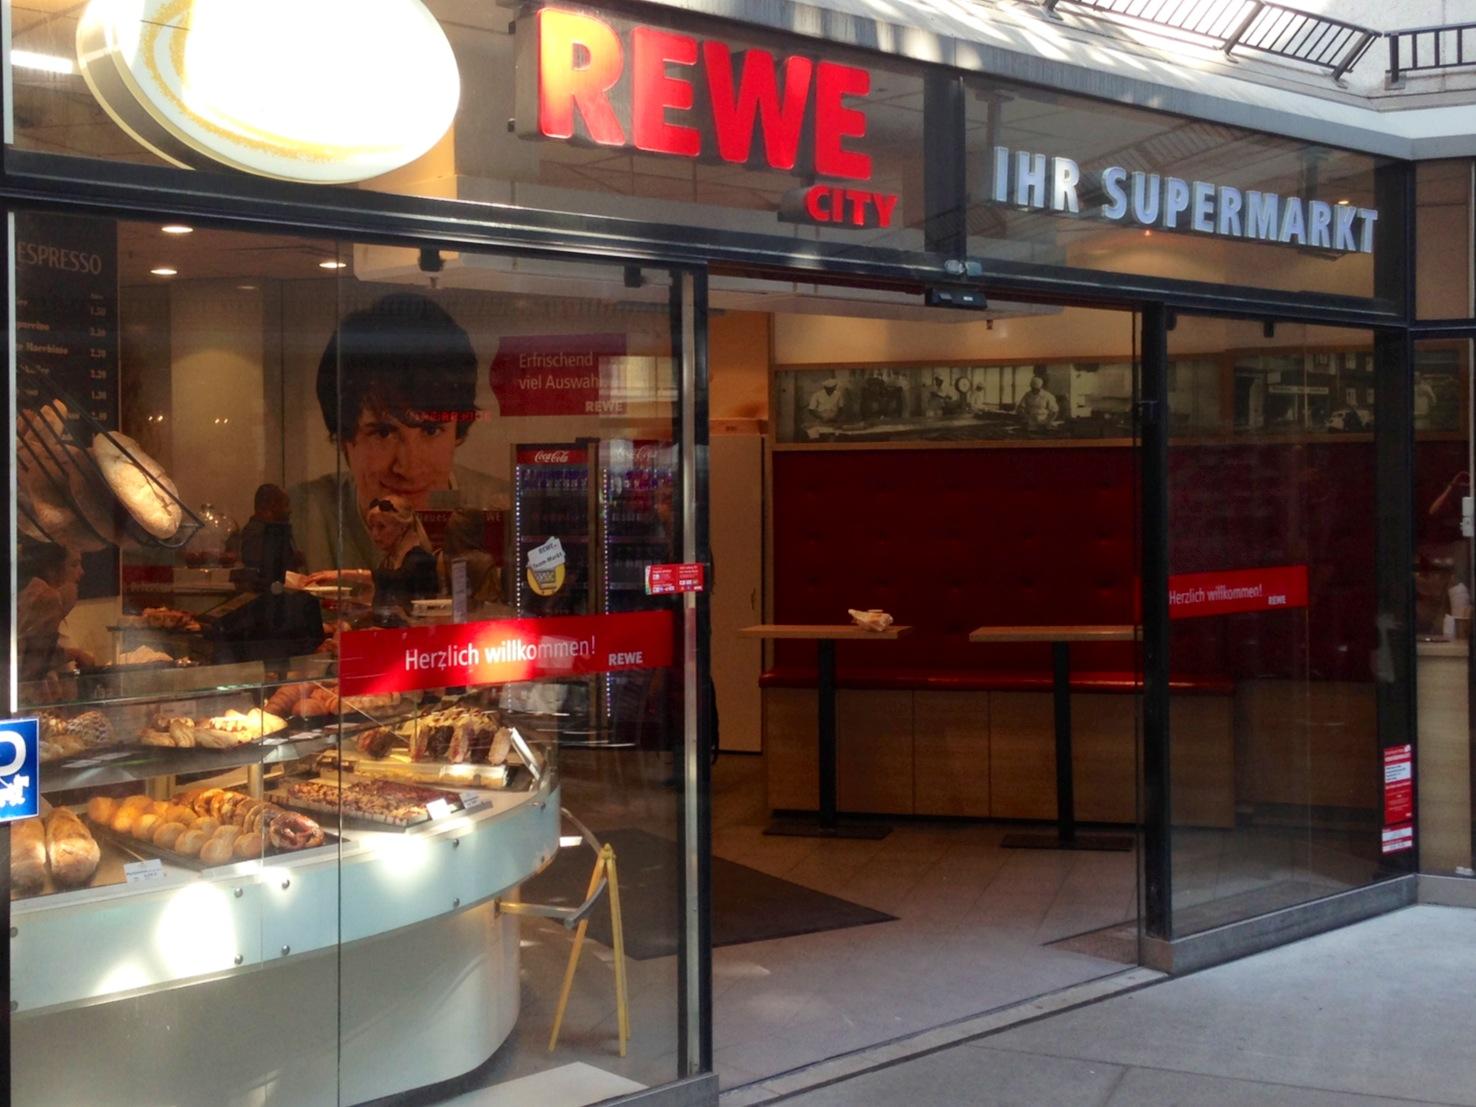 Cover image of this place Rewe